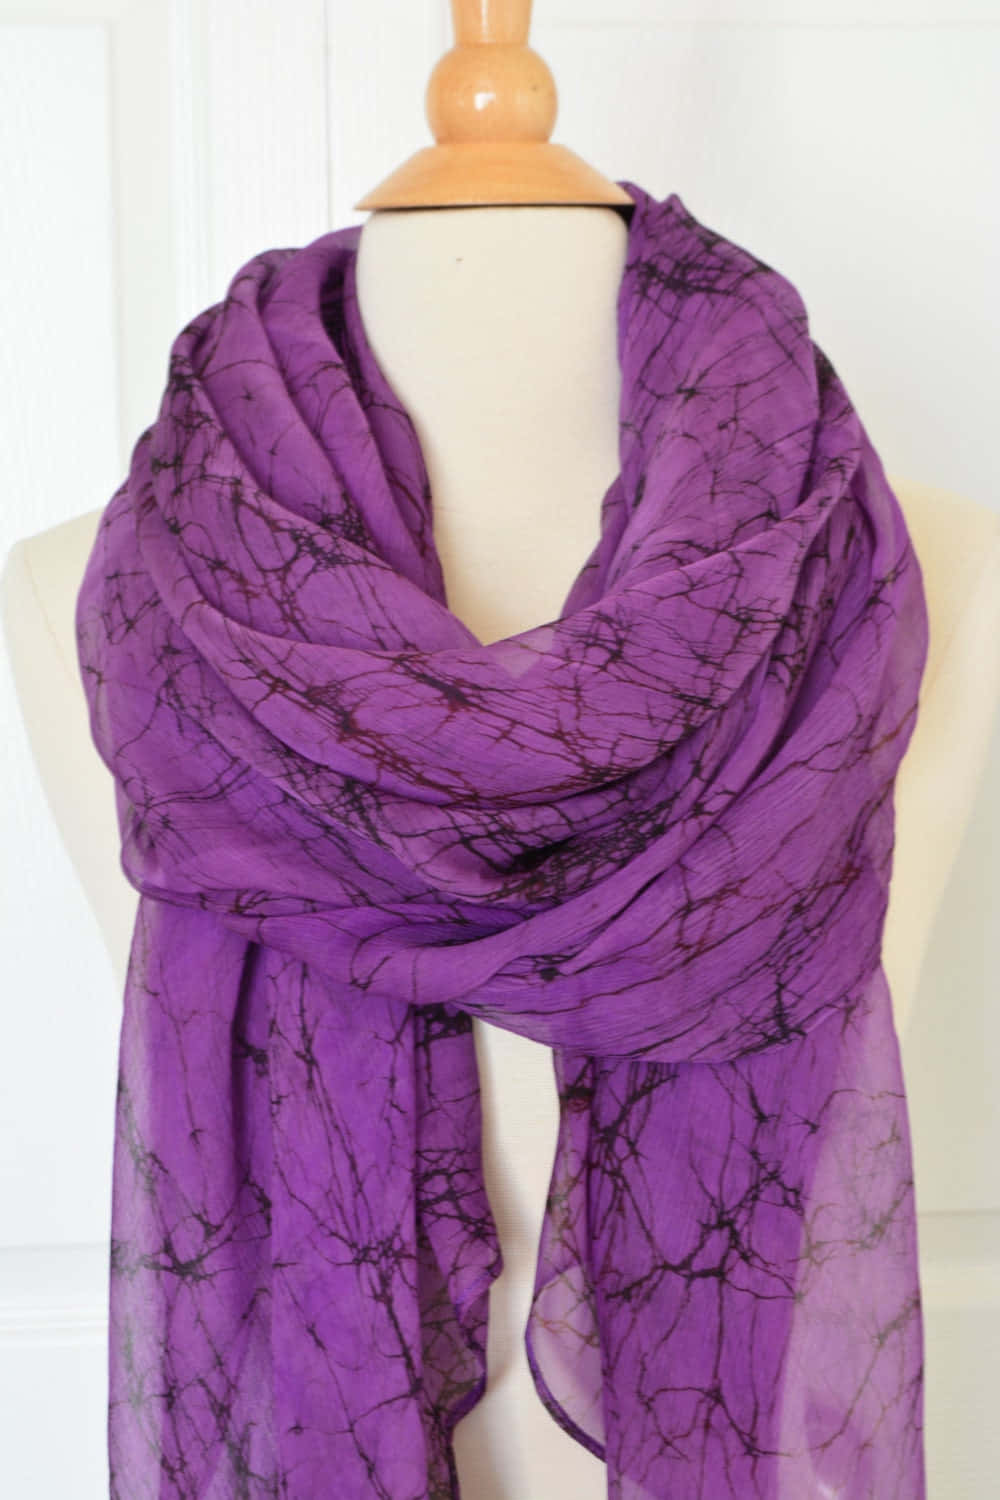 Get cozy with a Purple Scarf Wallpaper